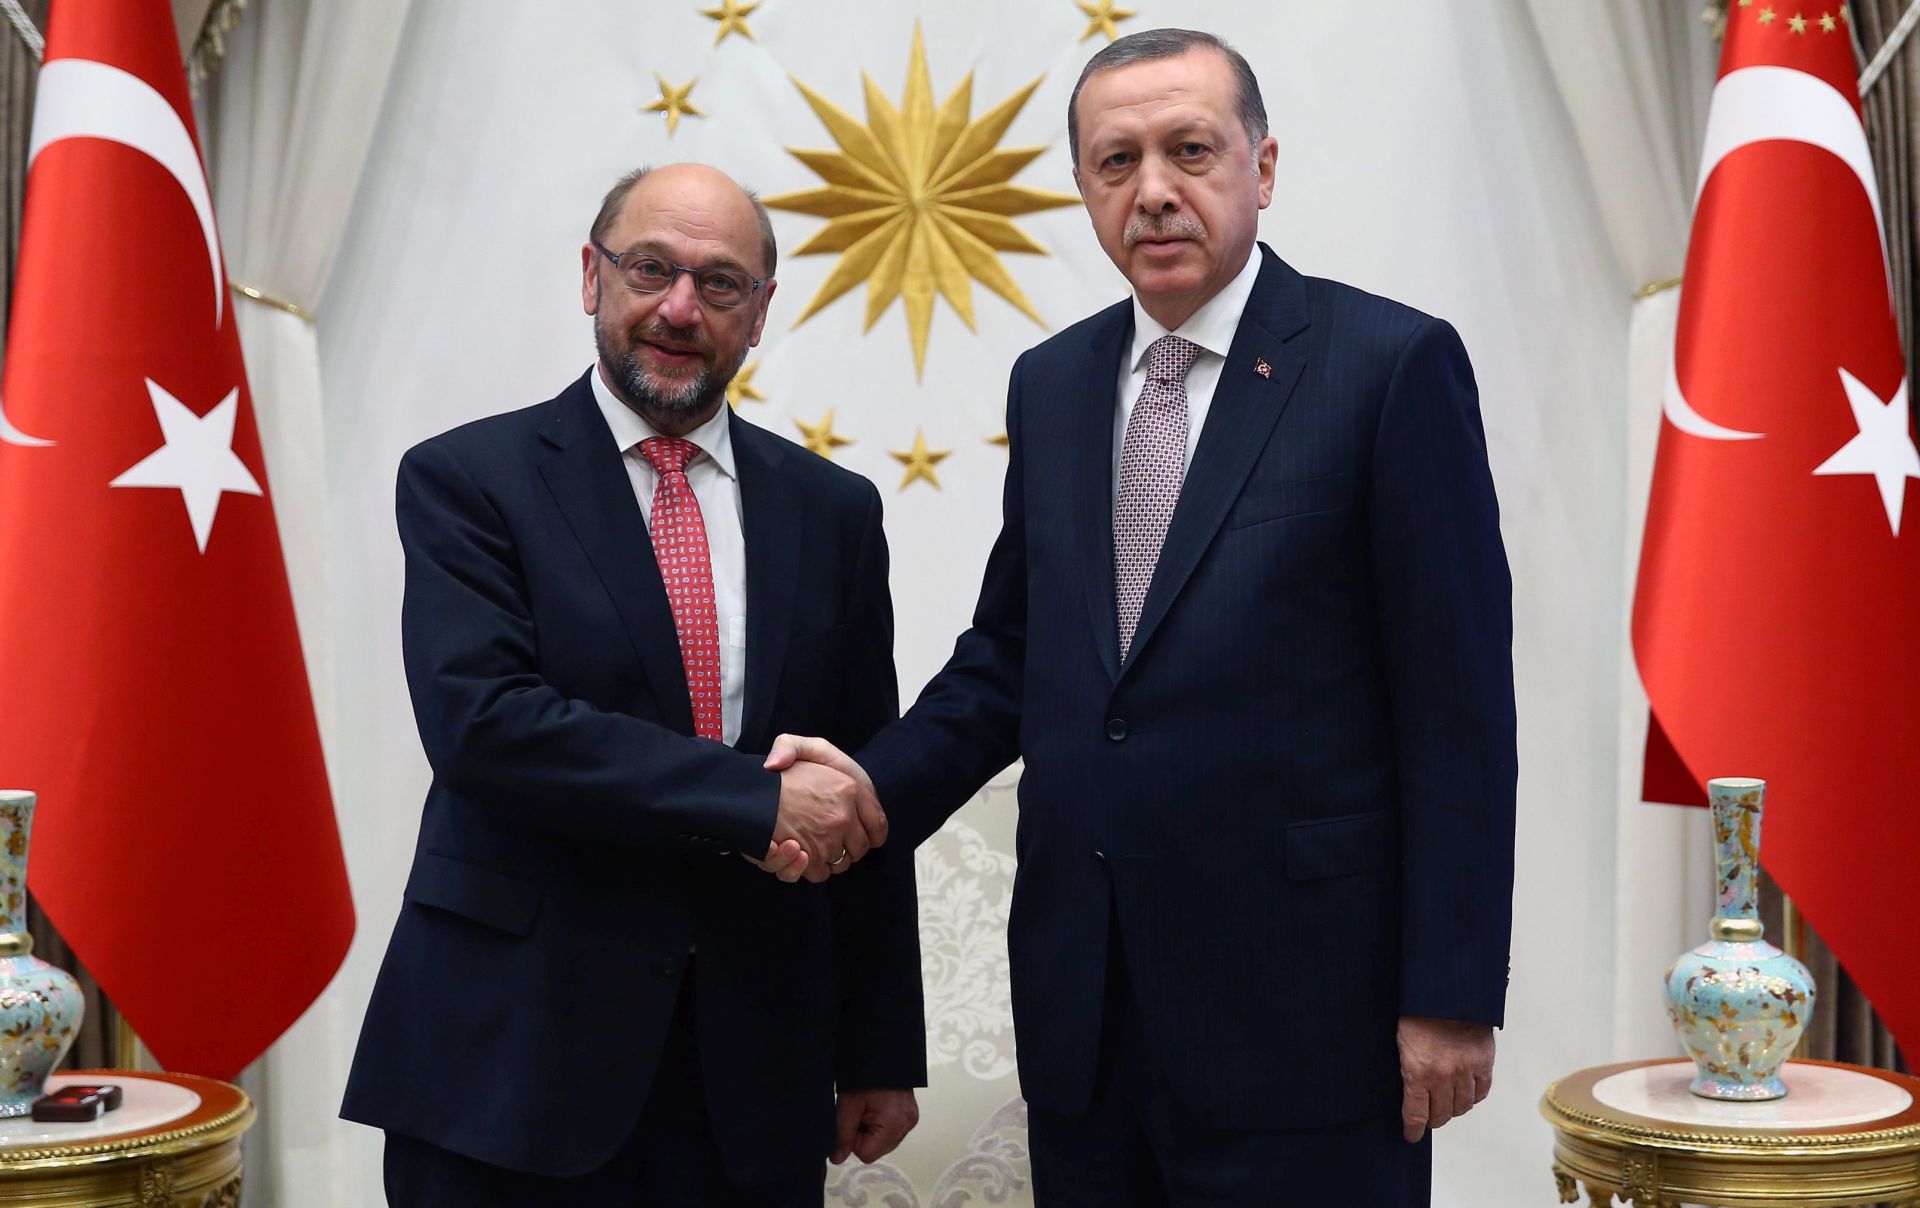 epa05518687 A handout picture provided by Turkish President Press office shows Turkish President Recep Tayyip Erdogan (R) shake hands with President of the European Parliament Martin Schulz (L) during their meeting in Ankara, Turkey, 01 September 2016.  EPA/TURKISH PRESIDENT PRESS OFFICE / HANDOUT  HANDOUT EDITORIAL USE ONLY/NO SALES